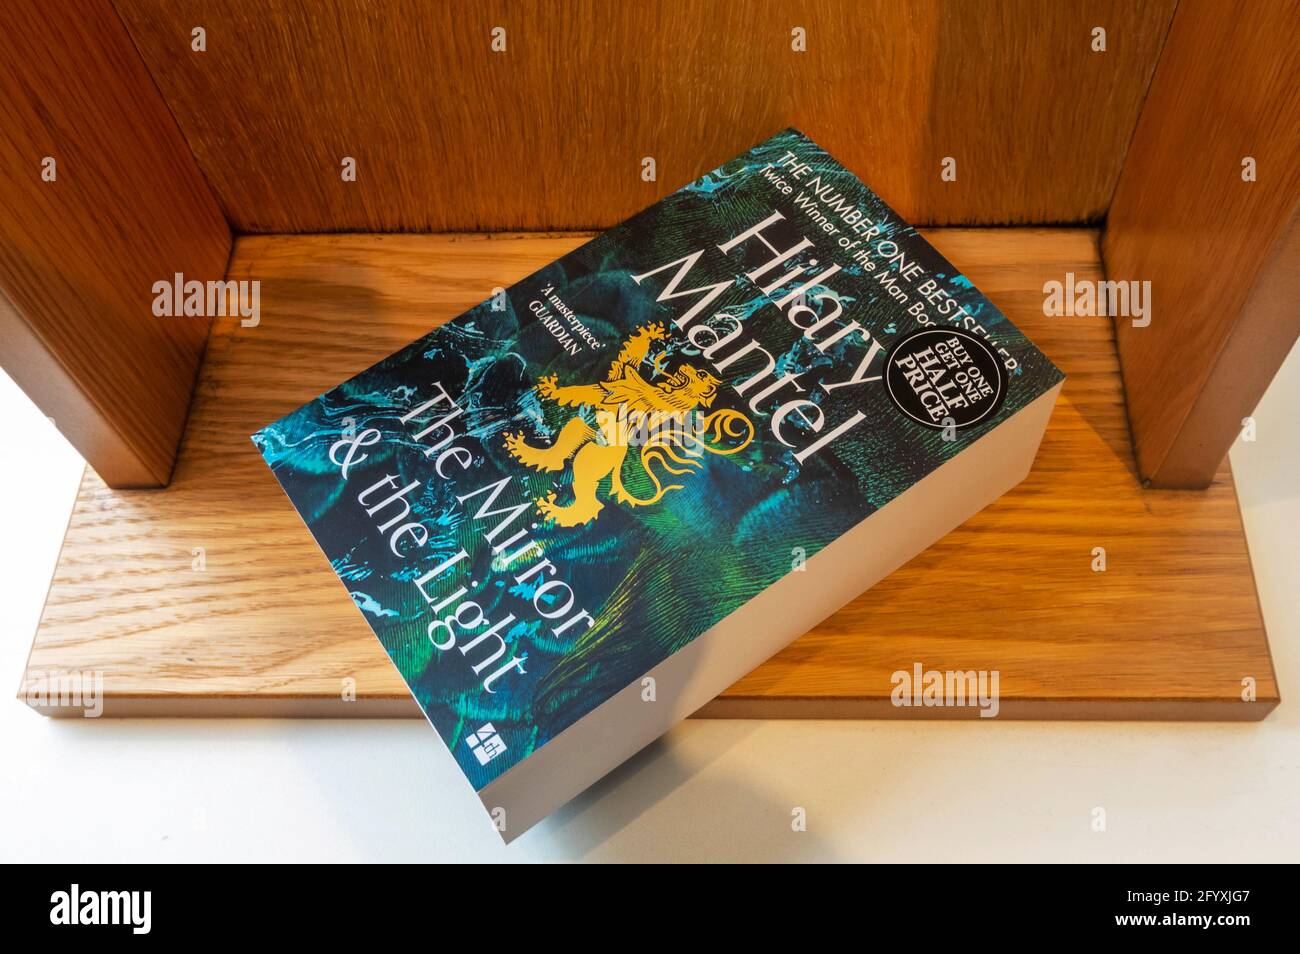 Hilary Mantel's (912 pages) The Mirror & the Light paperback edition on  special offer in a book store Stock Photo - Alamy